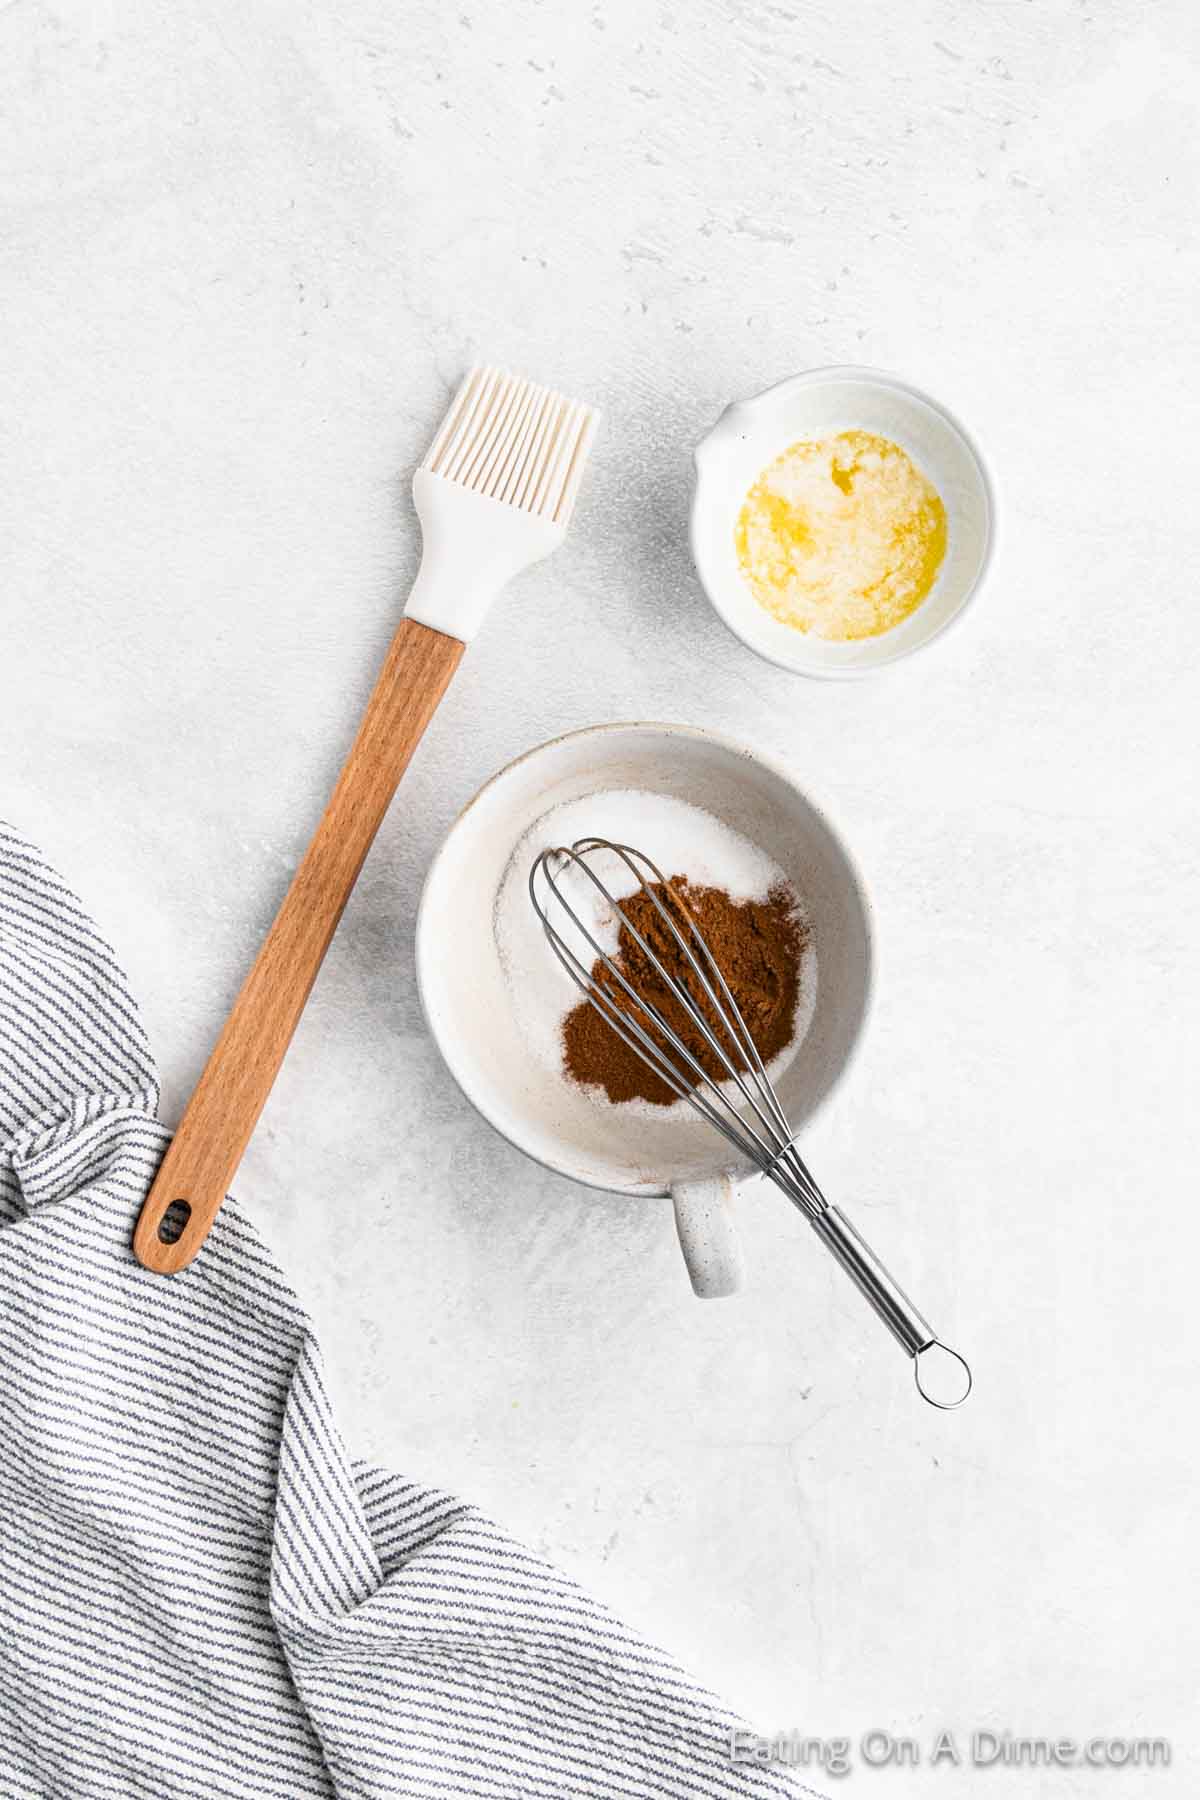 Whisking together cinnamon and sugar in a bowl with a bowl of melted butter and a brush on the side